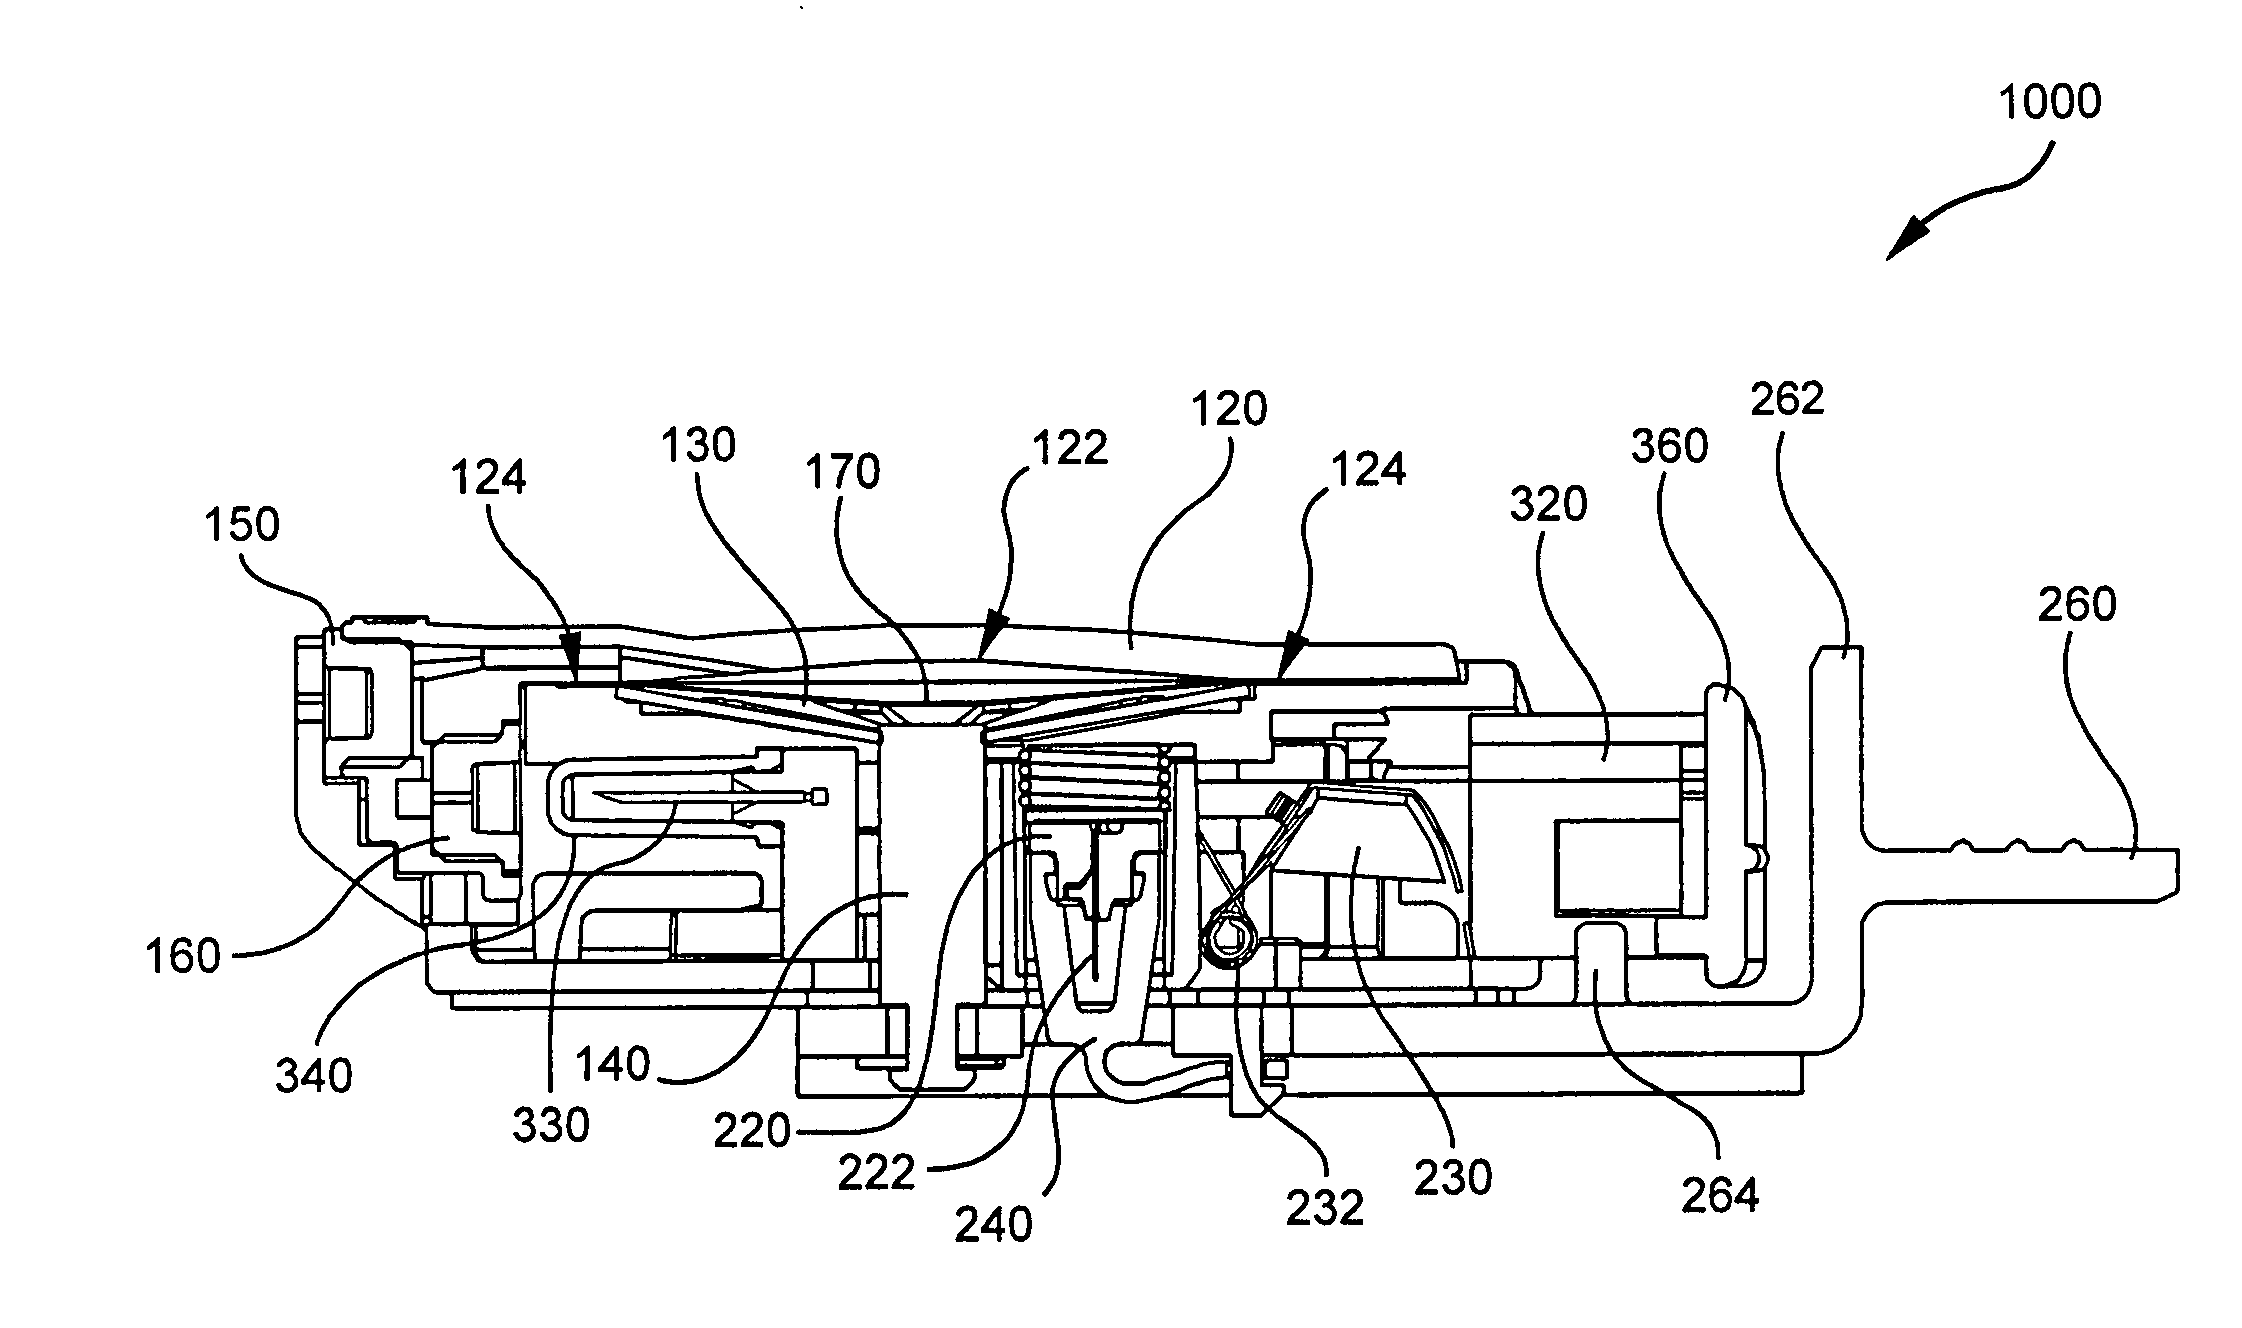 Patch-like infusion device